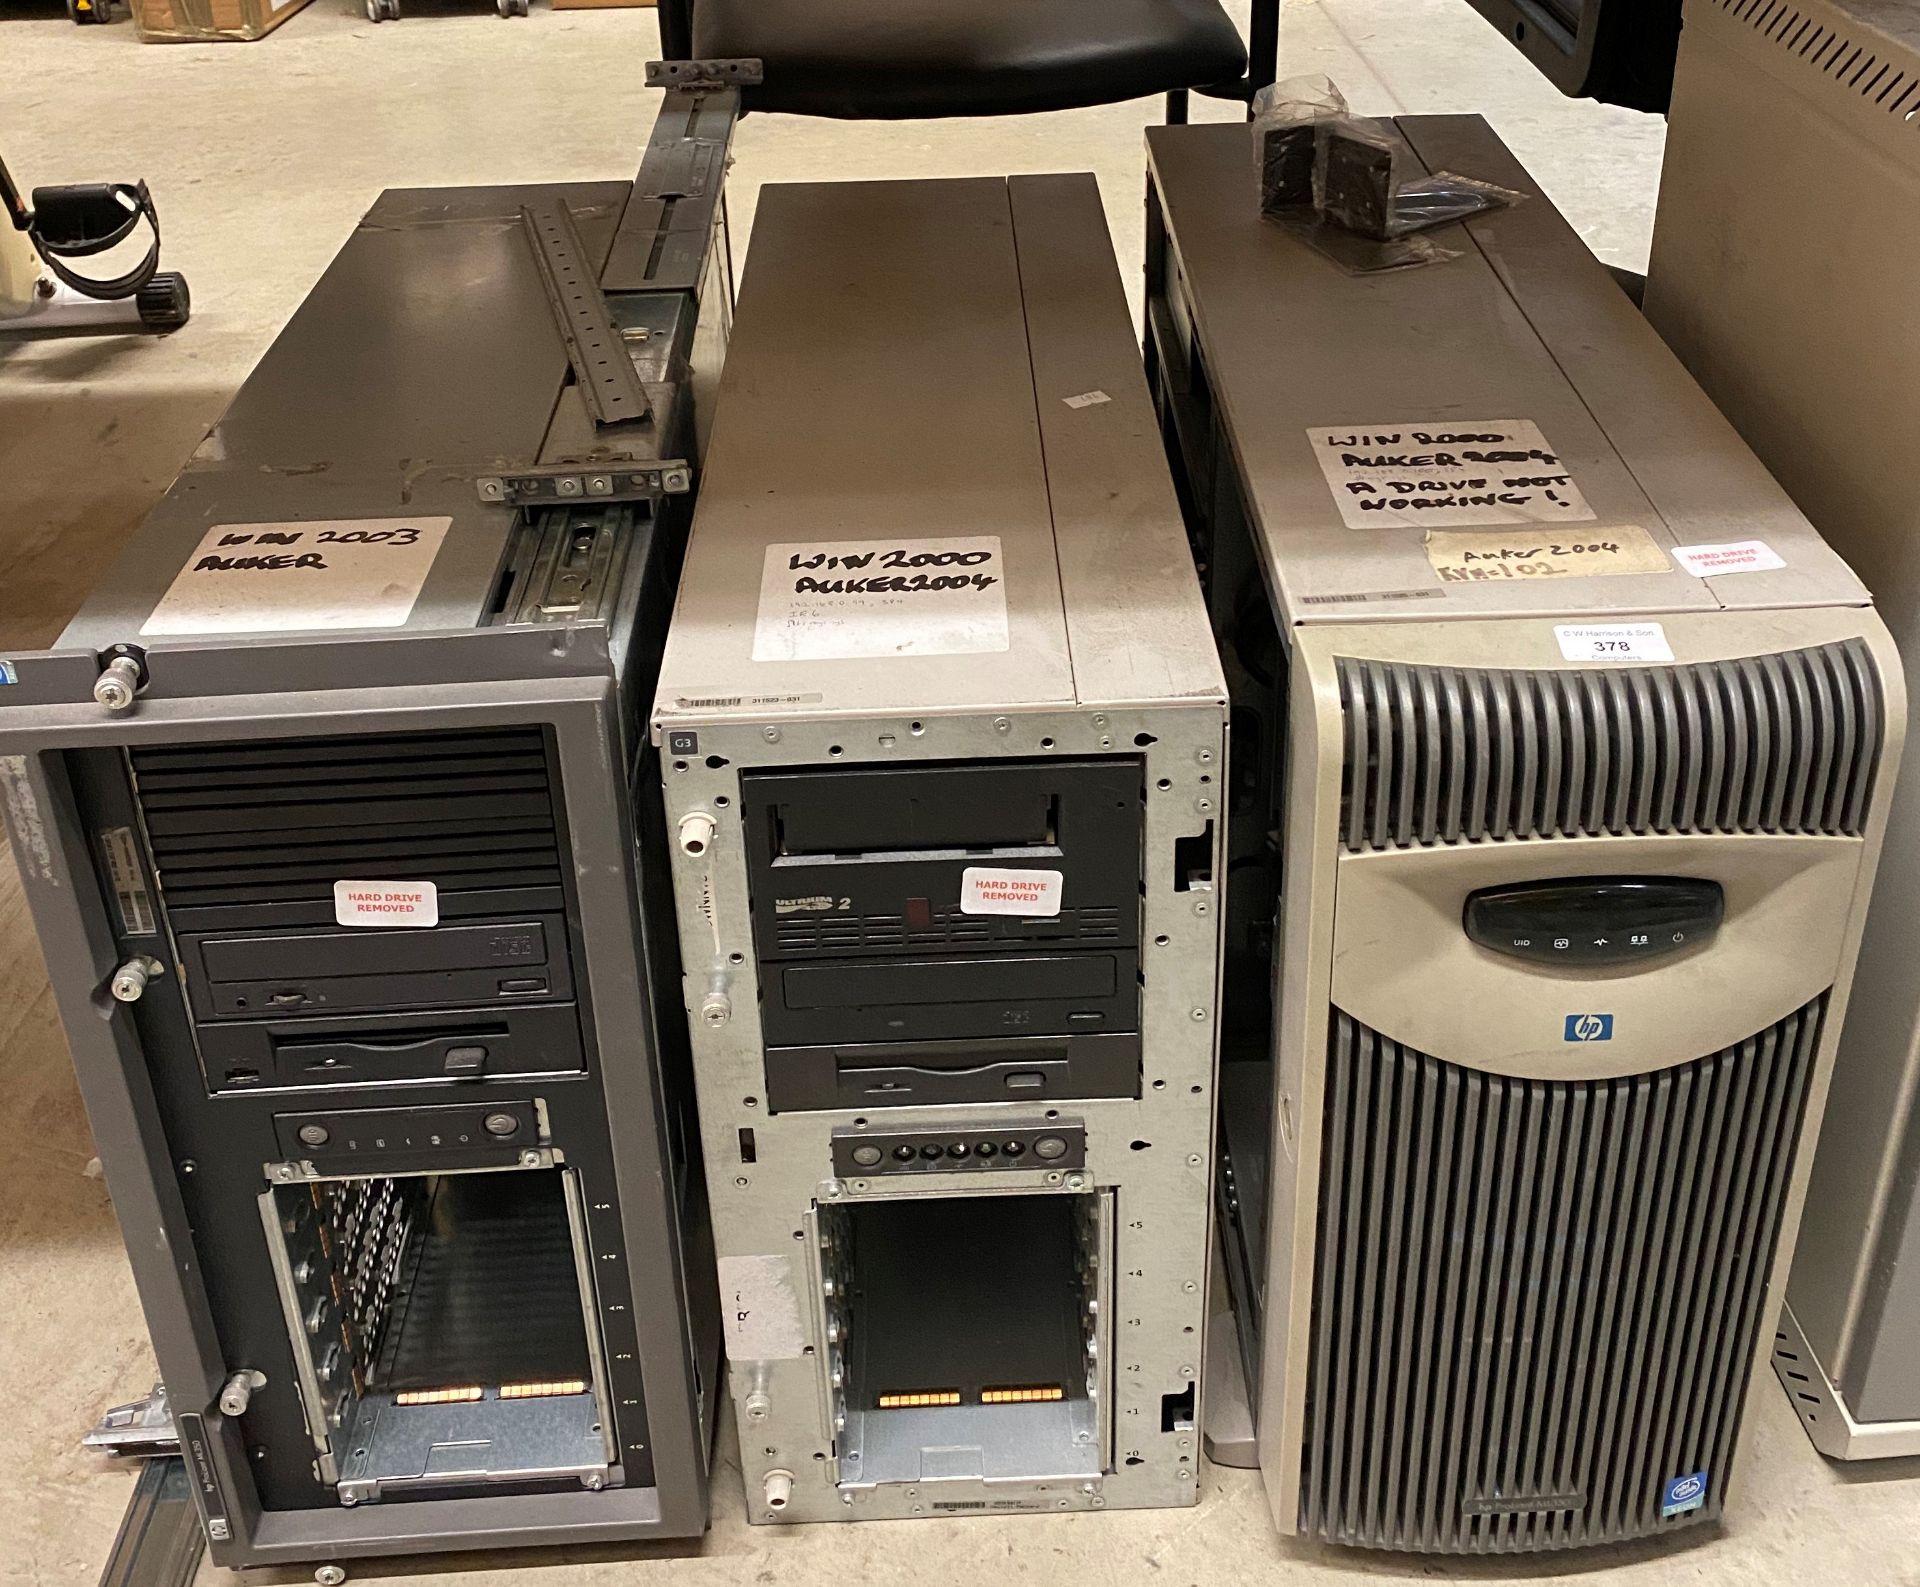 3 x servers by HP (please note hard drives removed)